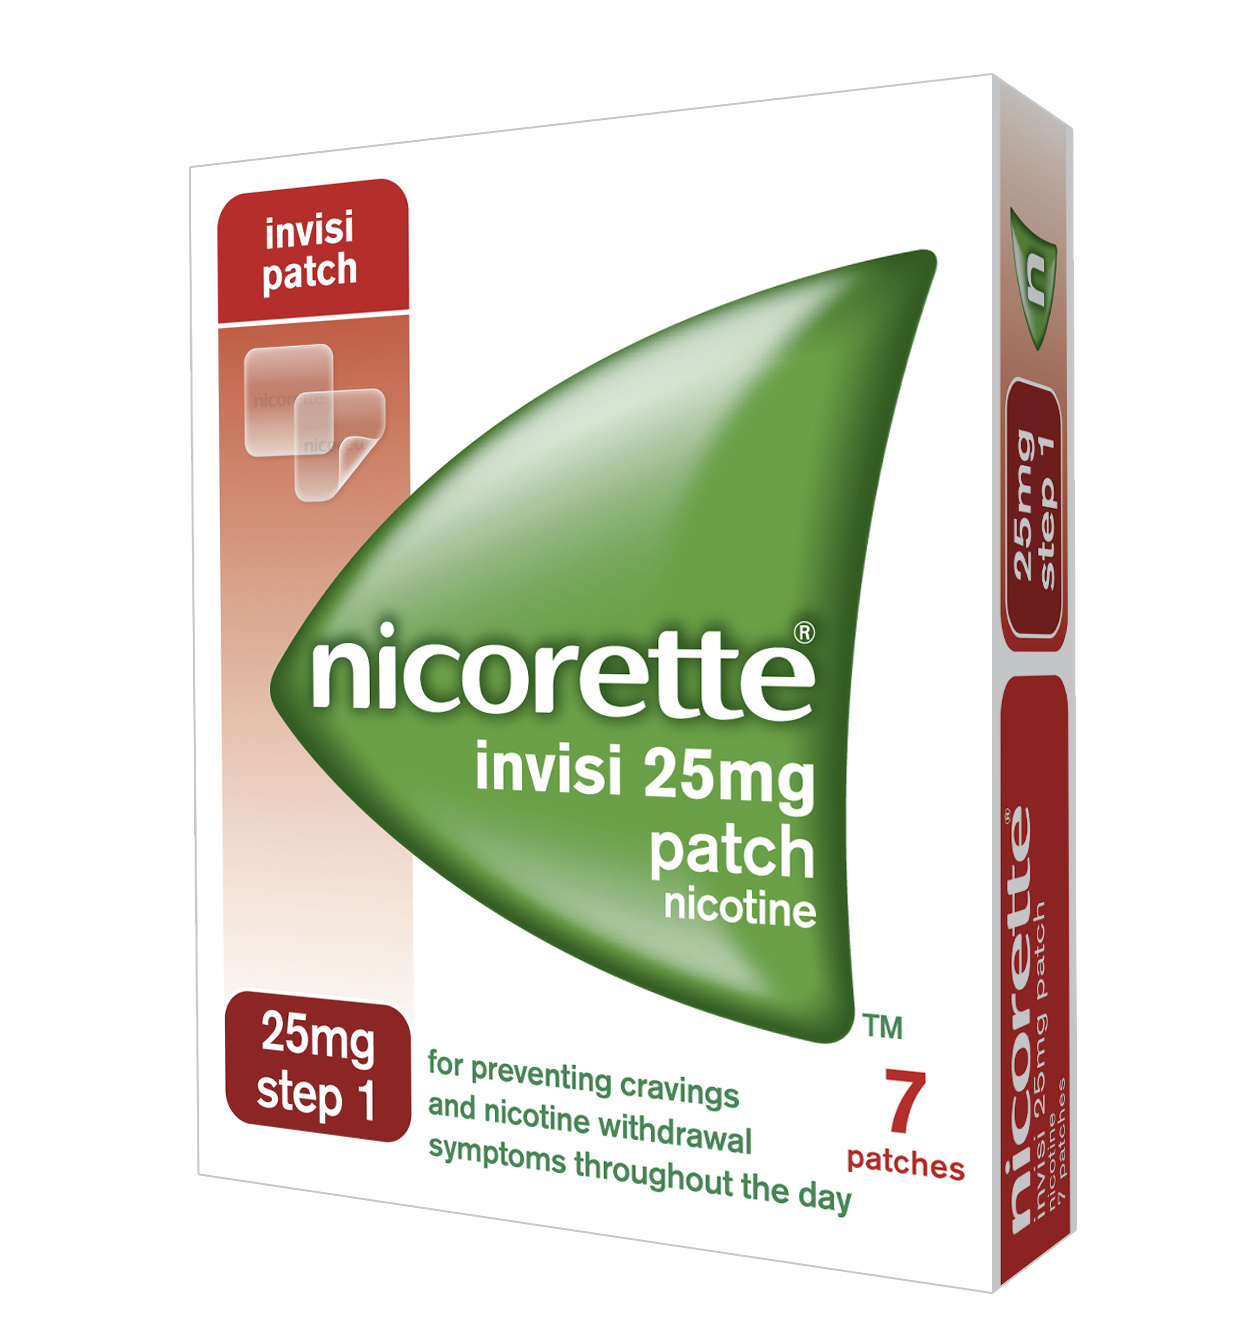 What Is The Best Nicotine Patch For The Price